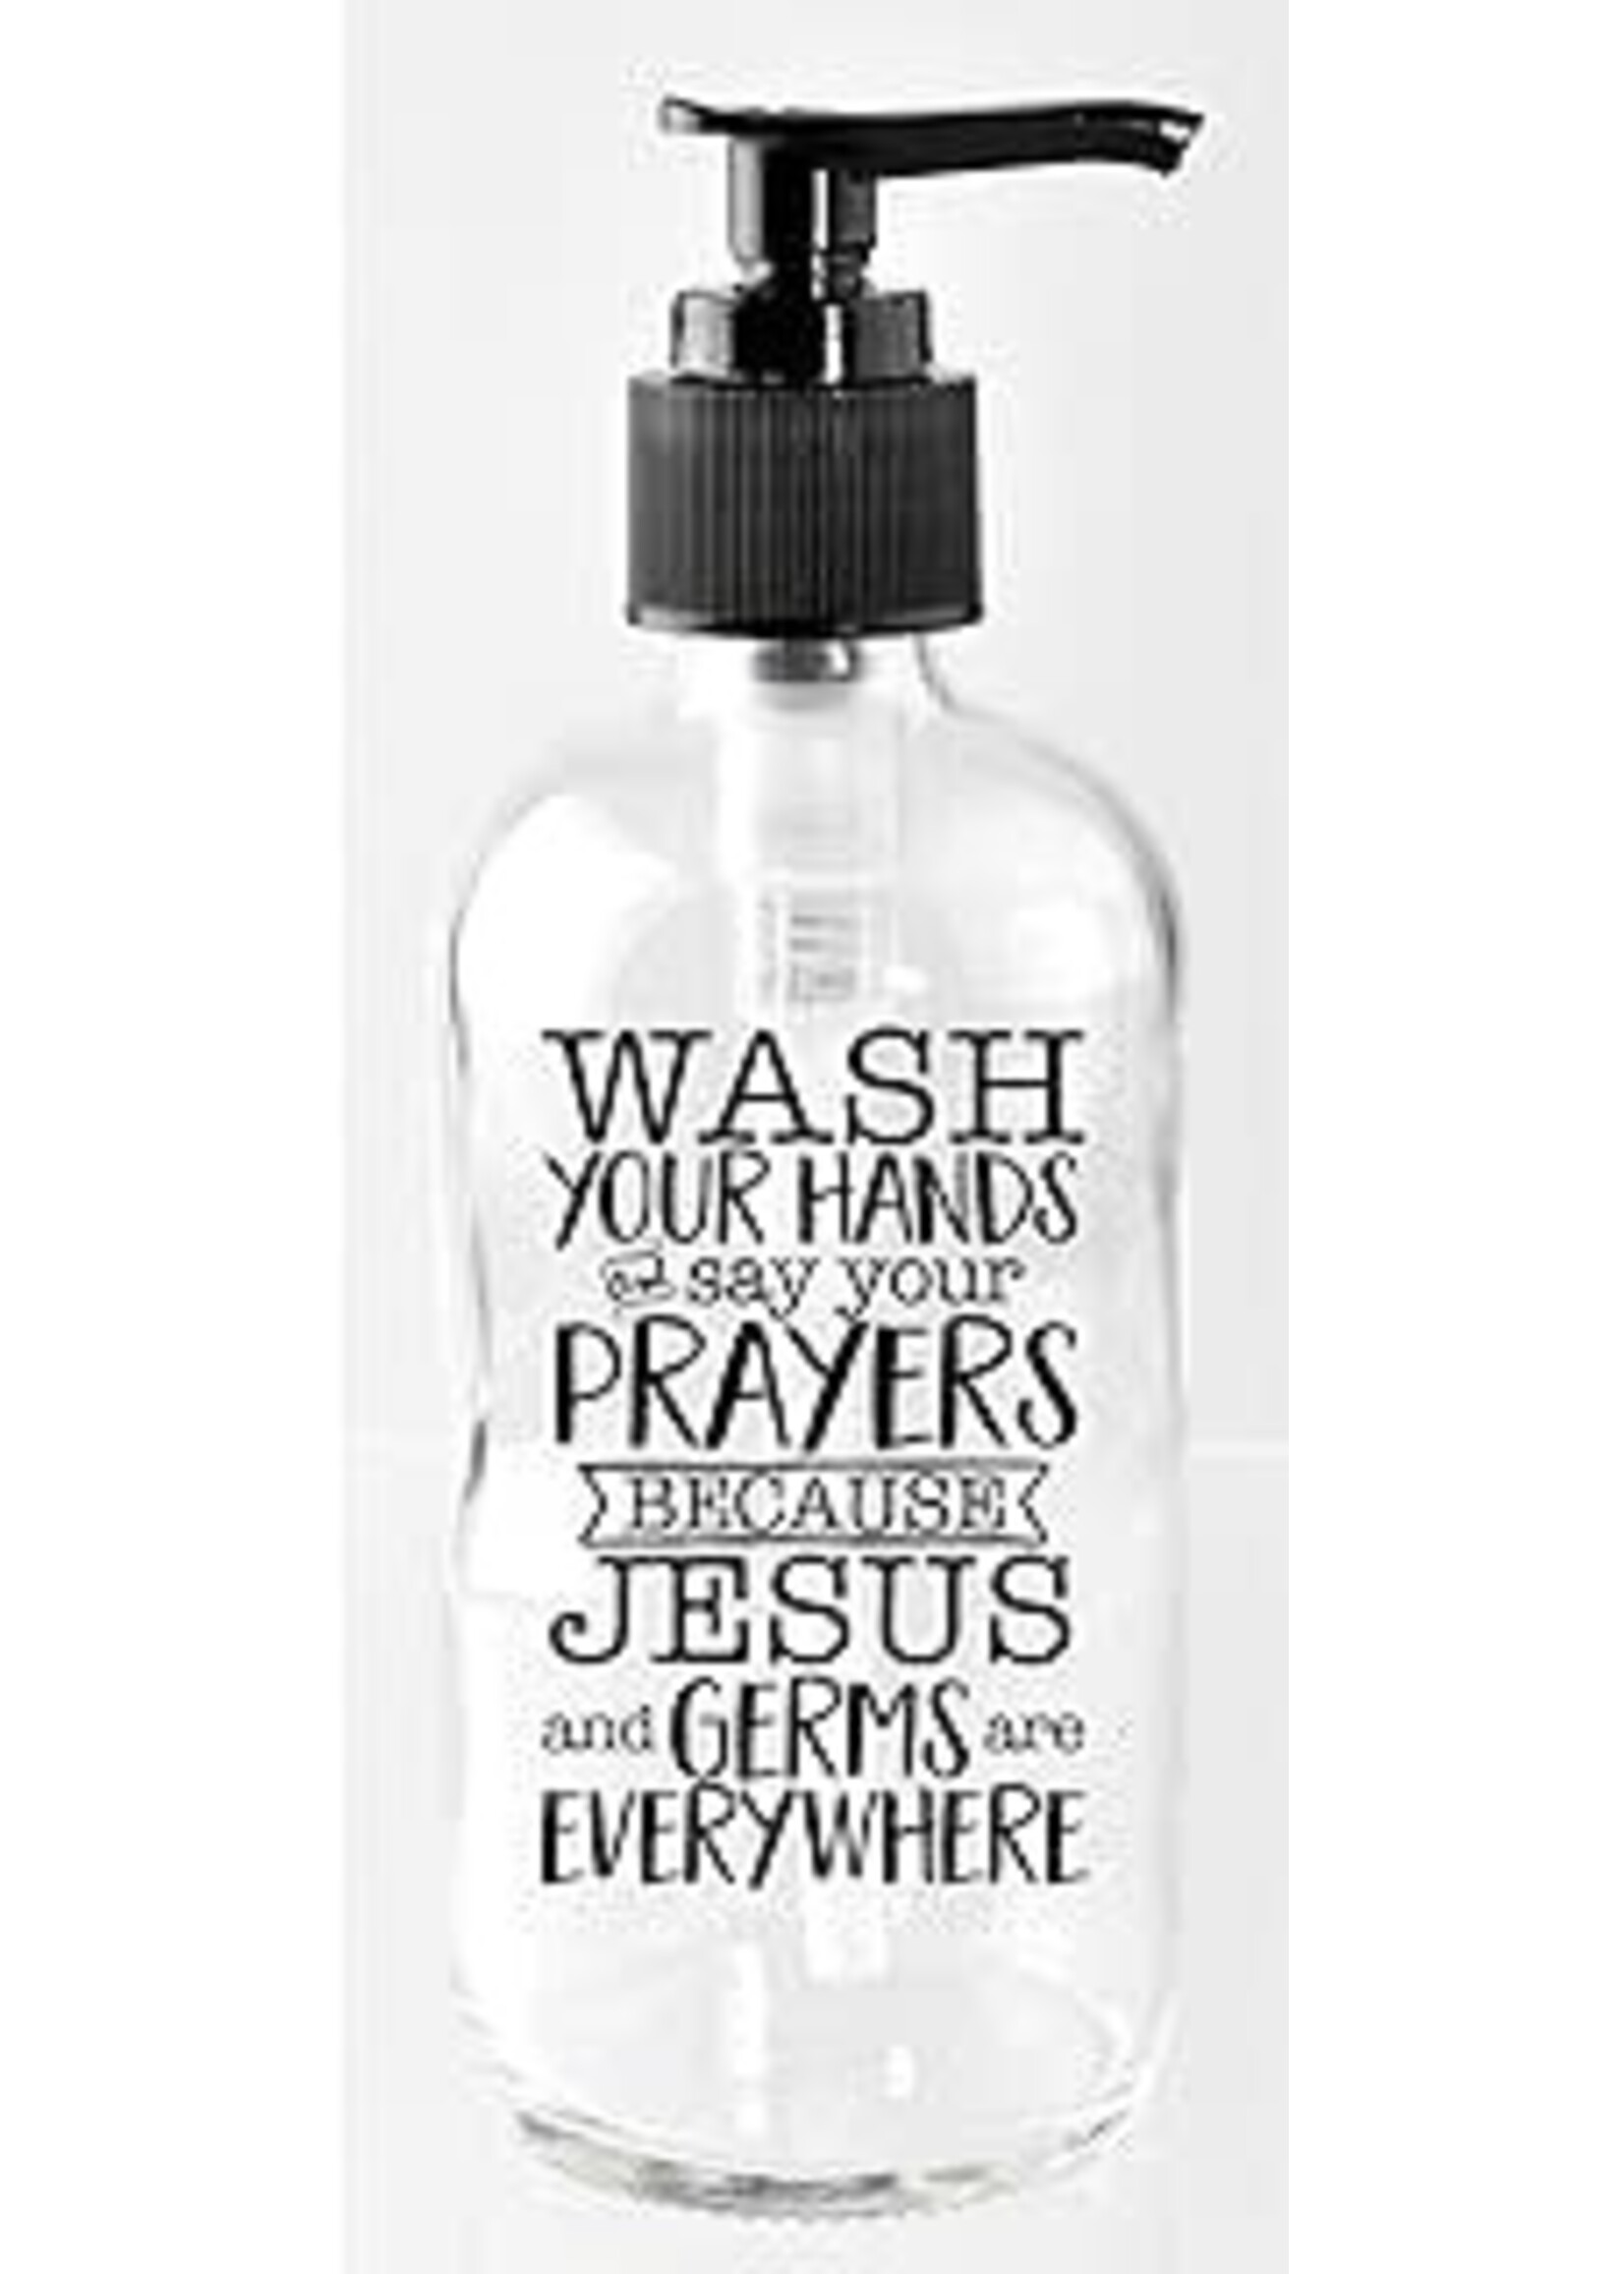 Soap Dispenser-Everyday Moments-Wash Your Hands (8 Oz)